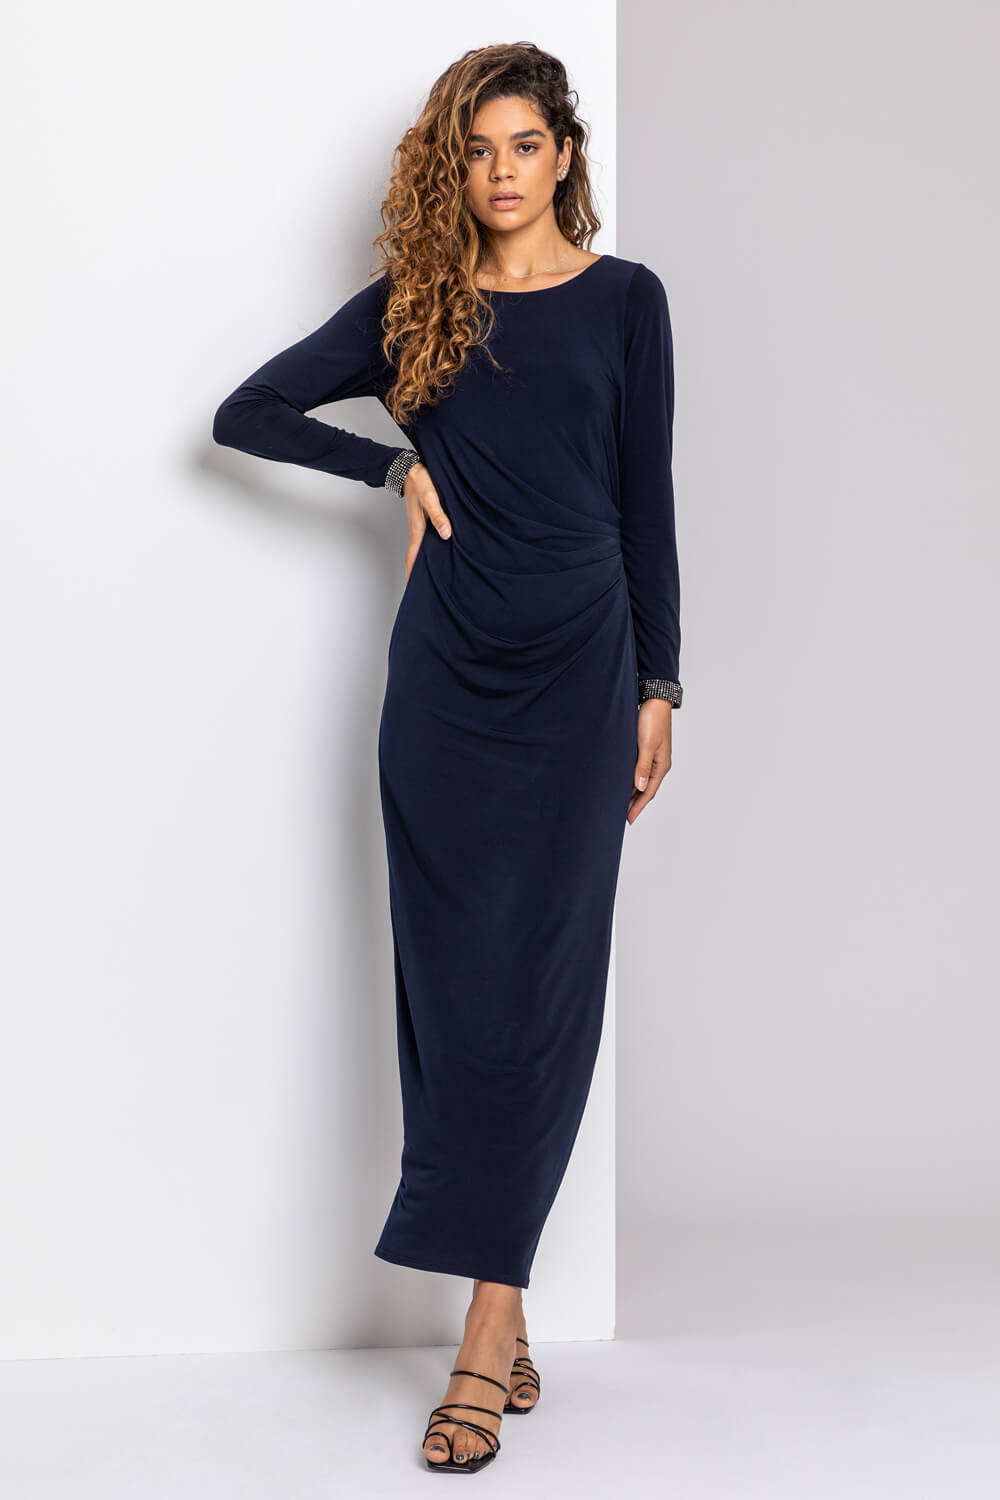 Midnight Blue Sparkle Embellished Ruched Maxi Dress, Image 3 of 4